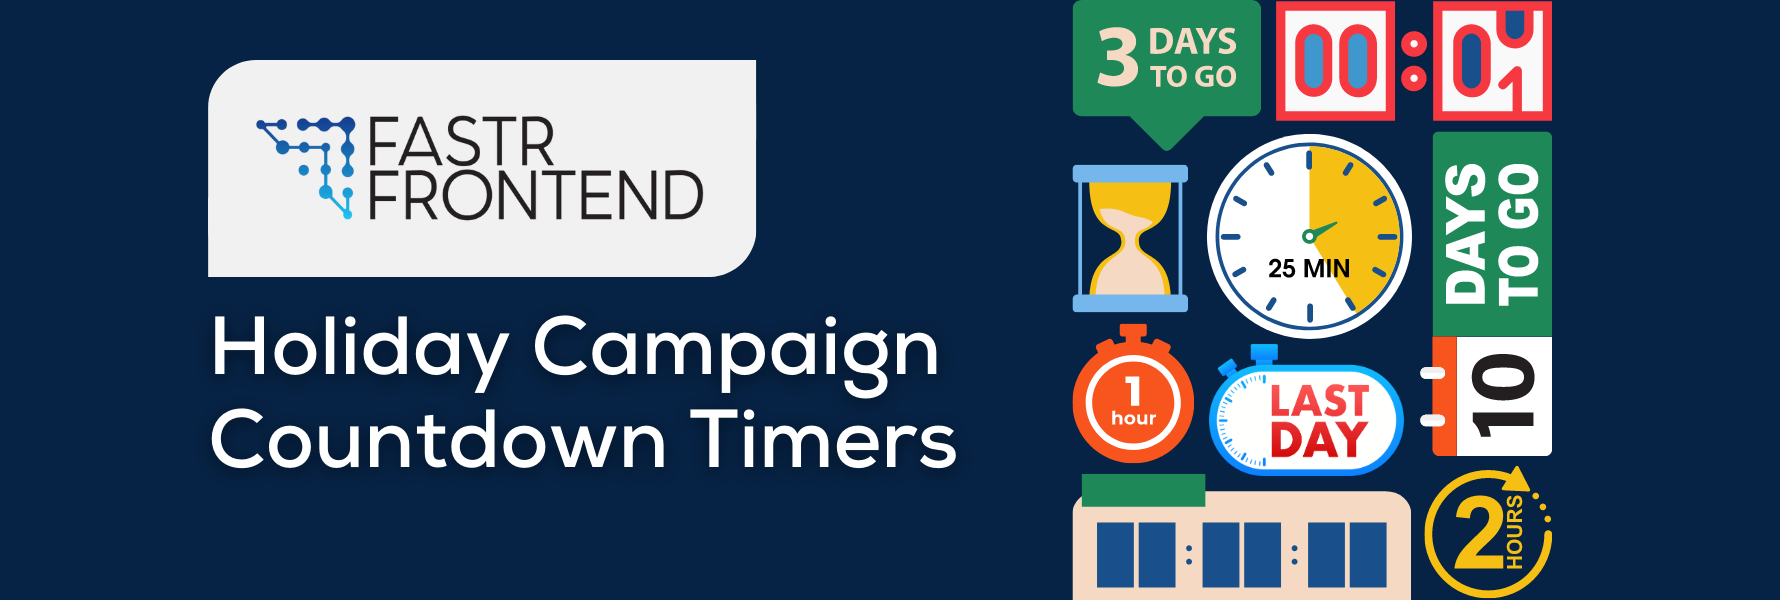 Fastr Frontend: Countdown Timers